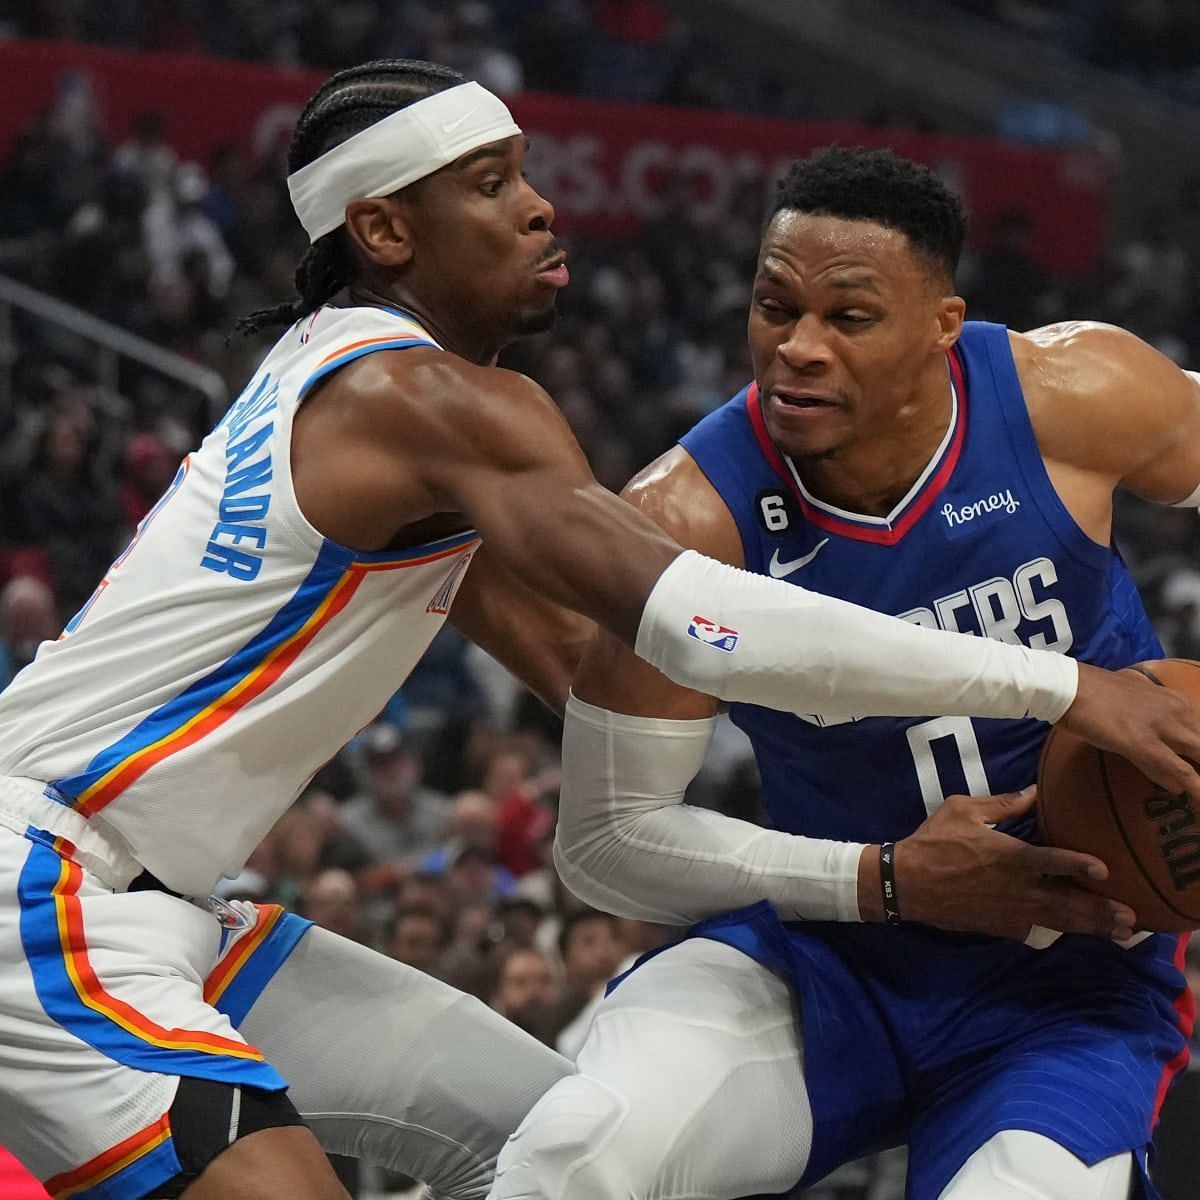 Shai Gilgeous-Alexander, Russell Westbrook show off at Met Gala